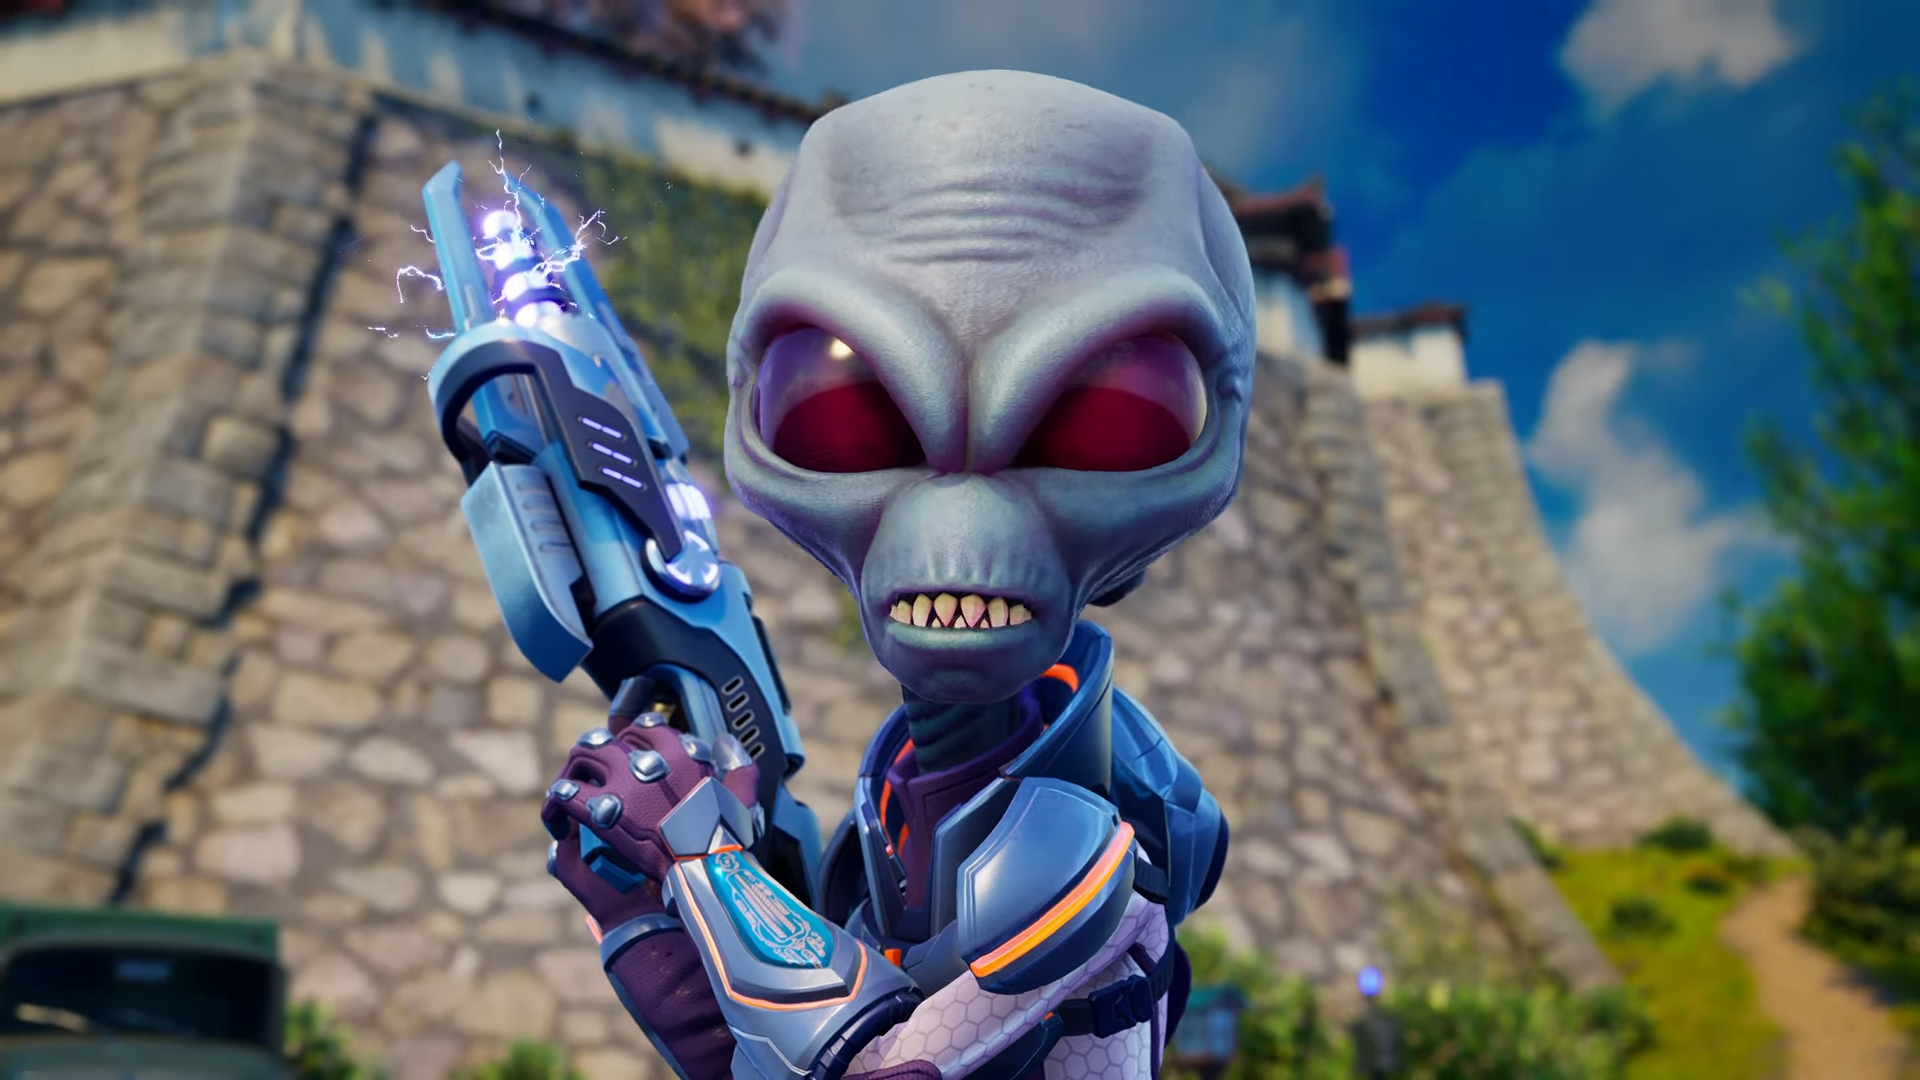 Destroy all Humans 2 reprobed. Destroy all Humans! (2020). Destroy all Humans оружие. Destroy all Humans 2 2006. All humans 2 reprobed